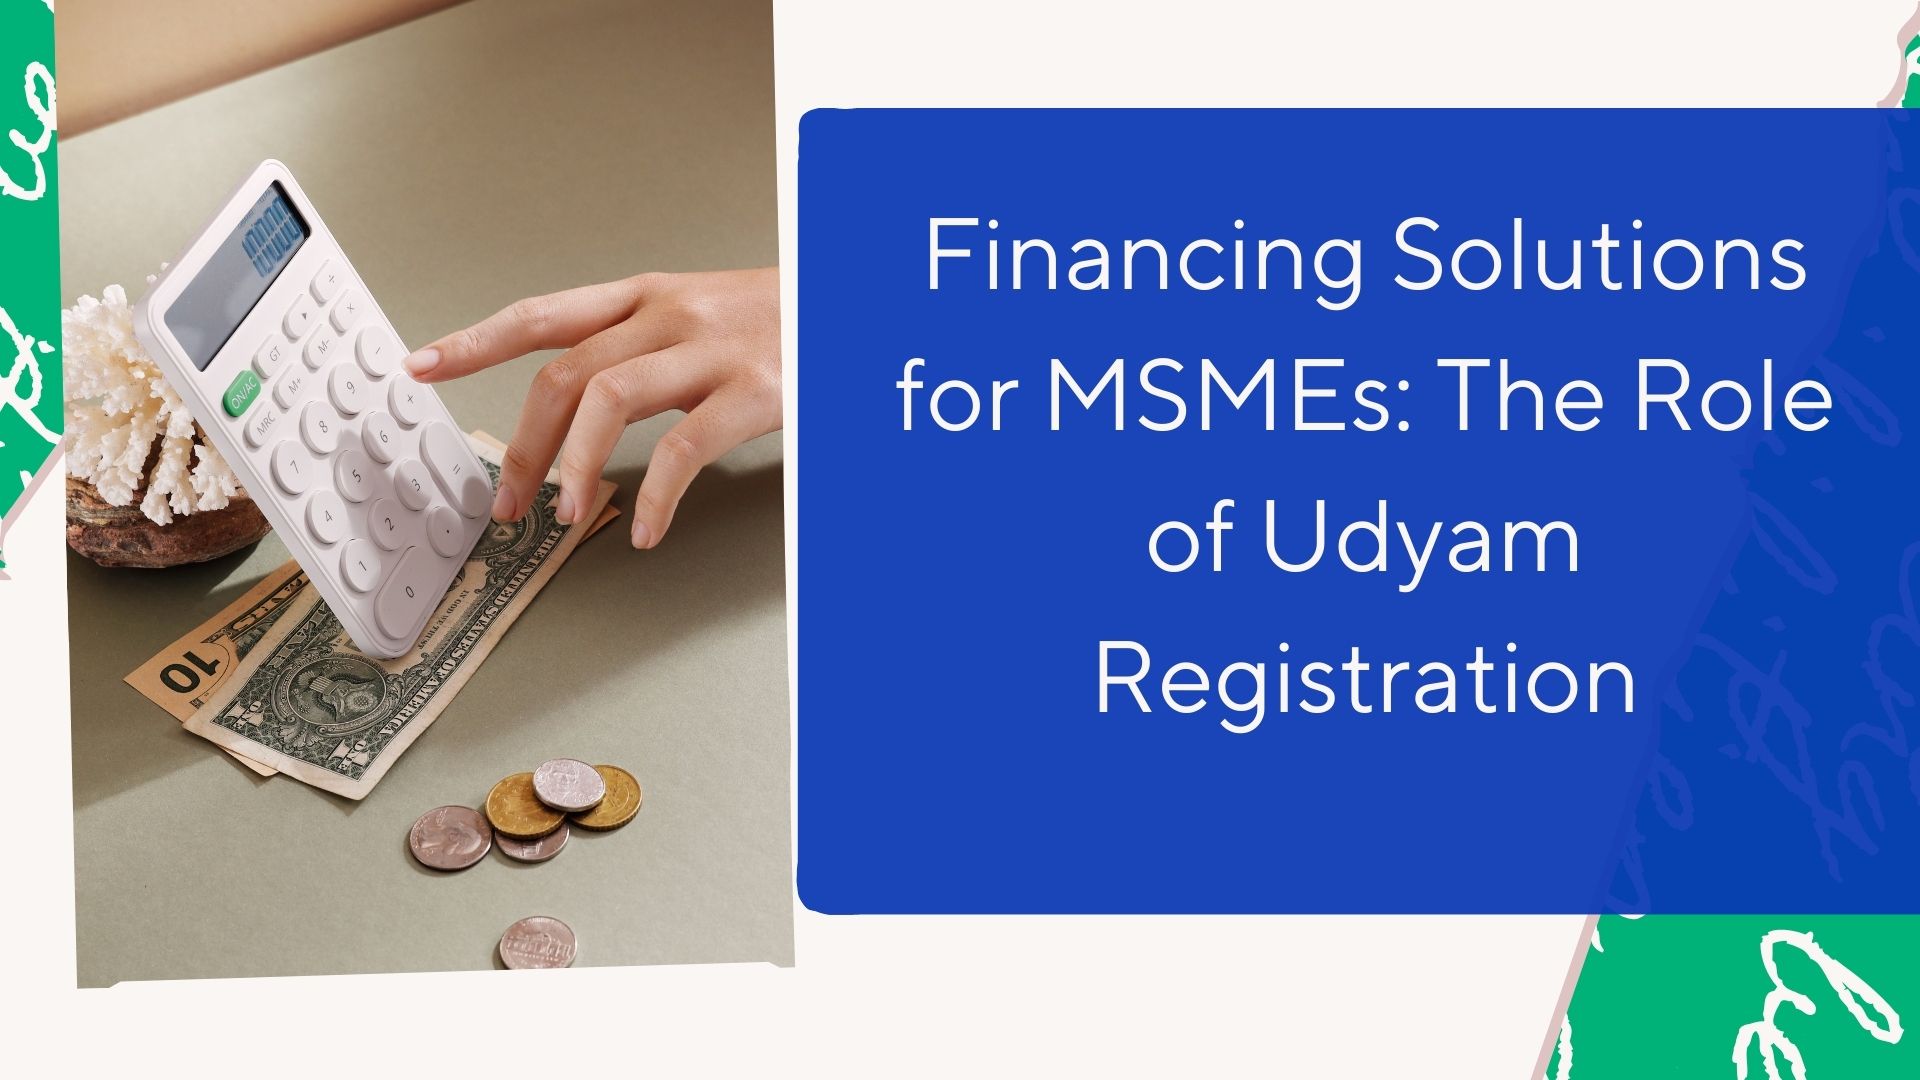 Financing Solutions for MSMEs: The Role of Udyam Registration